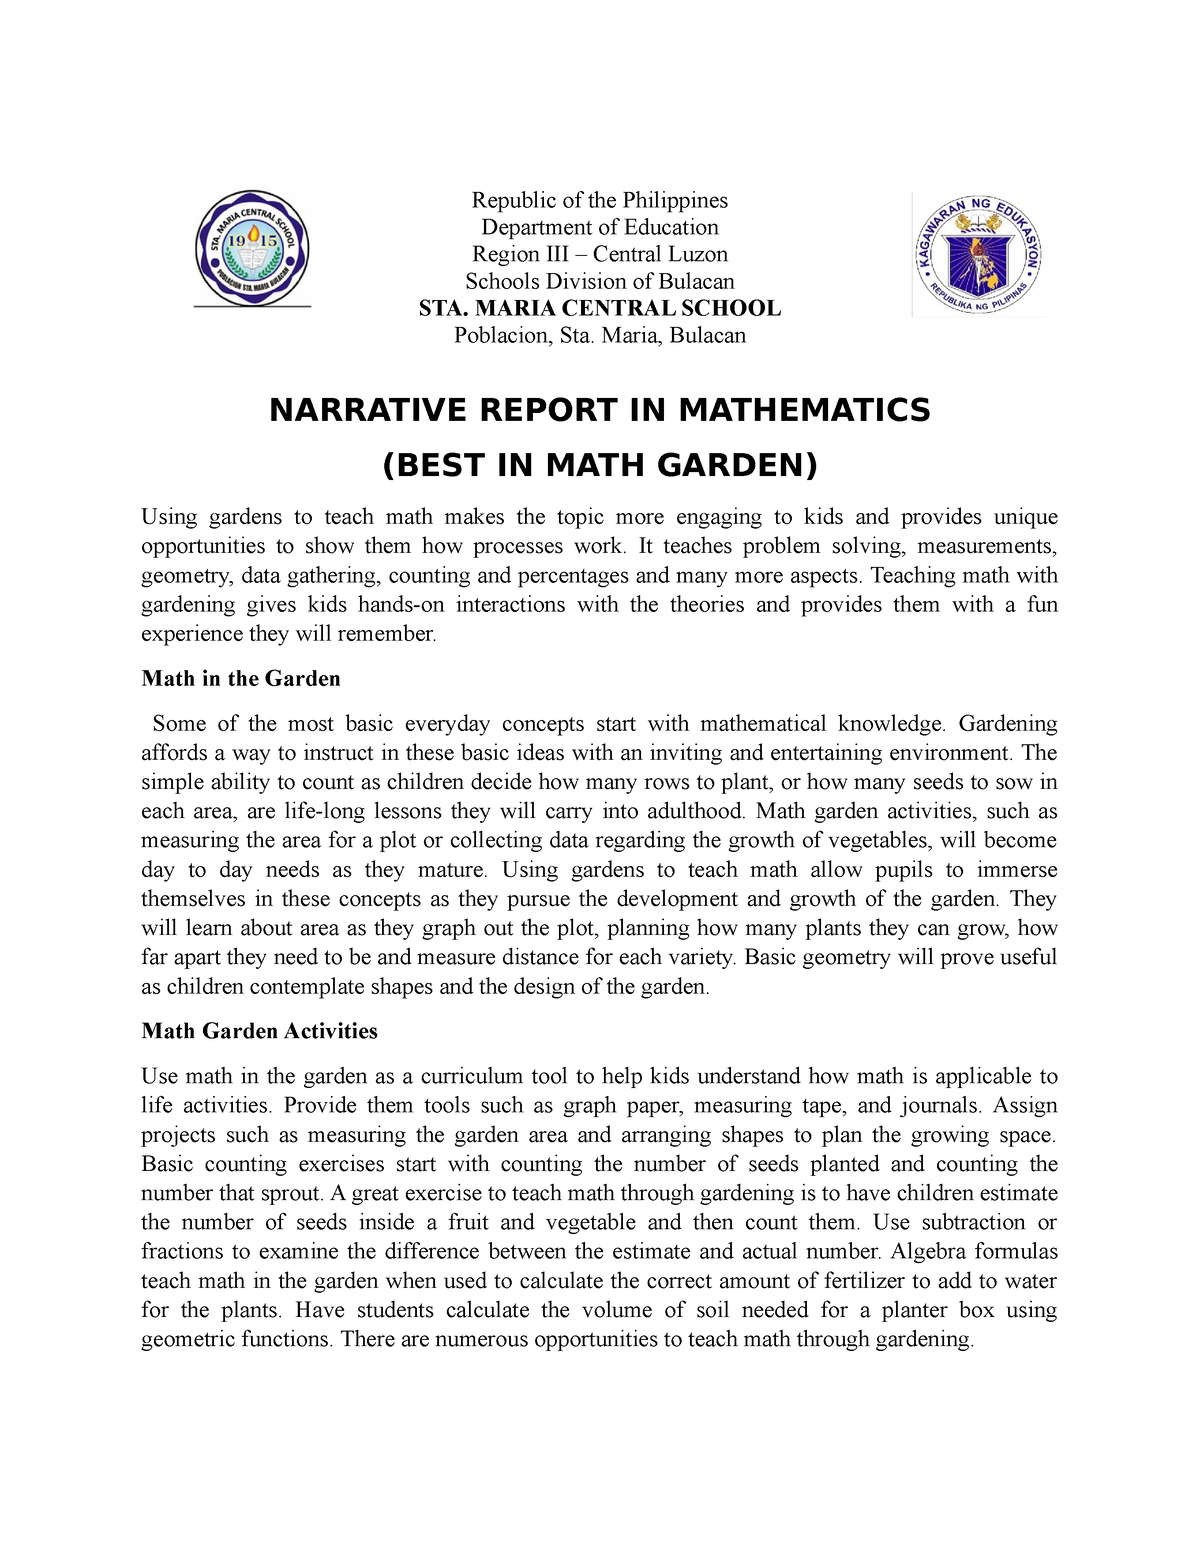 sample narrative report on research